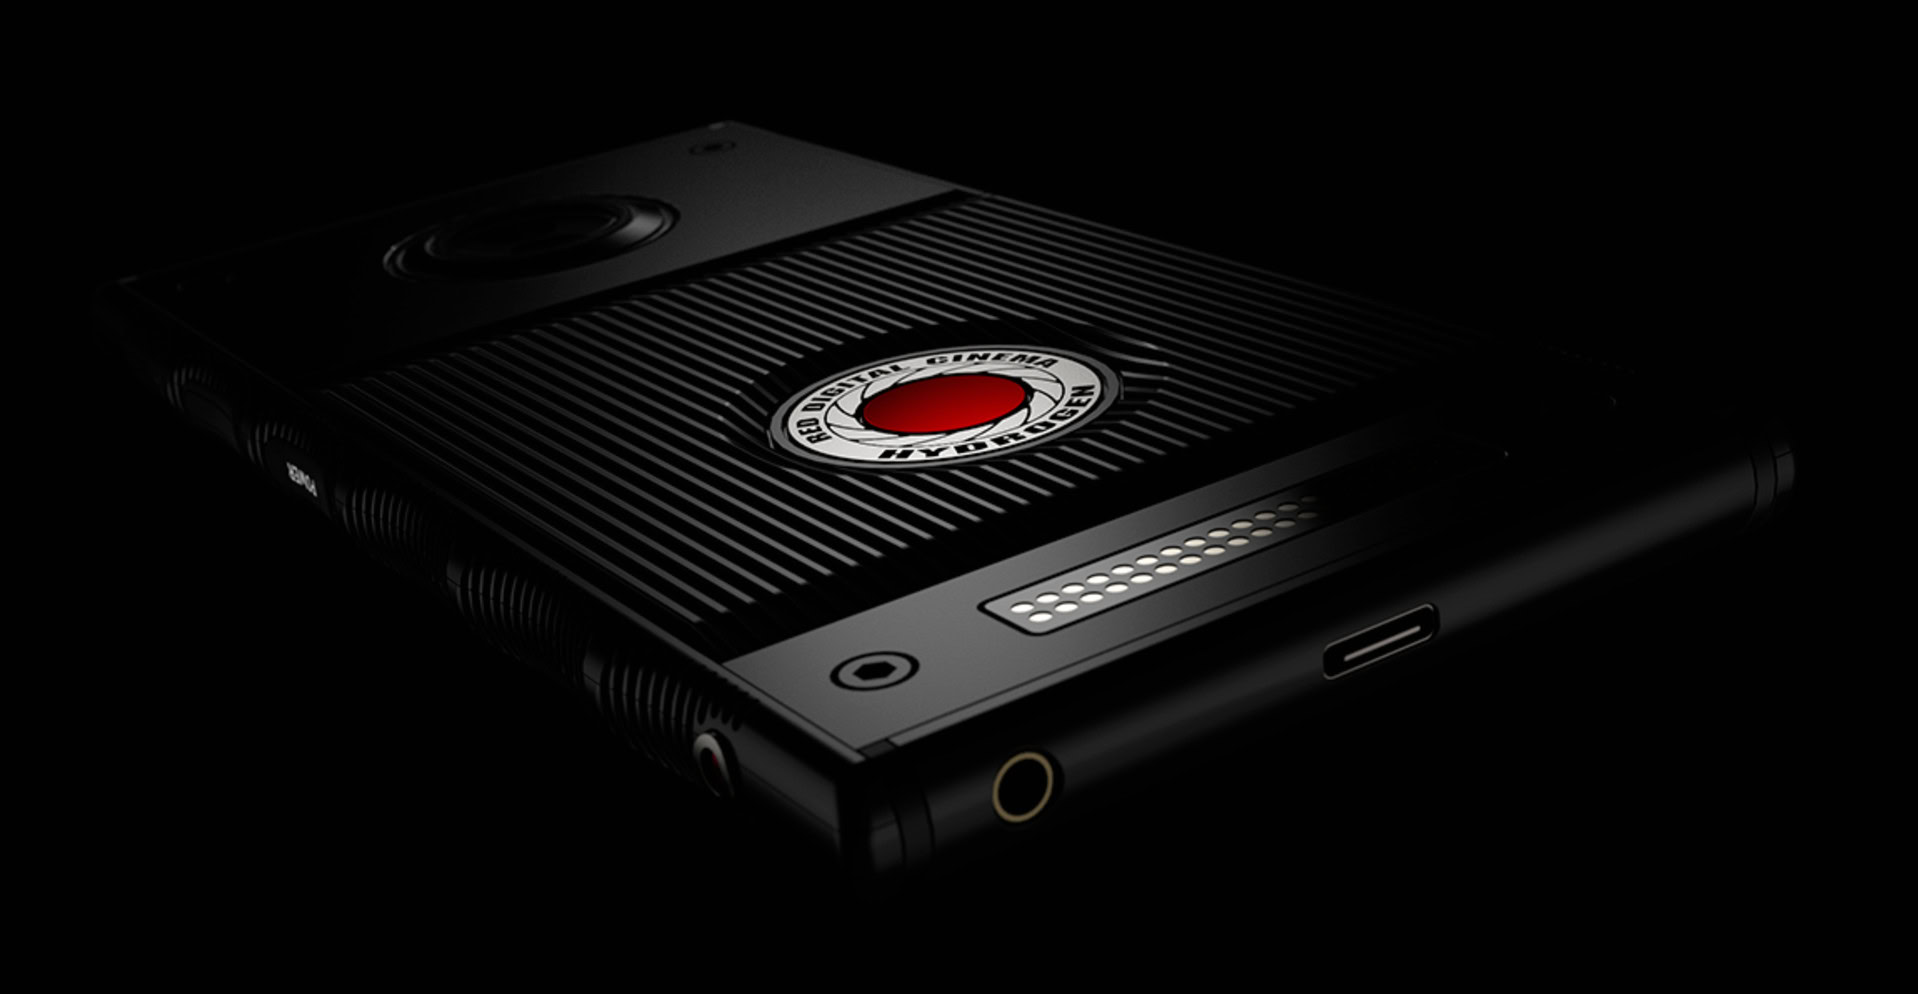 The RED Hydrogen One